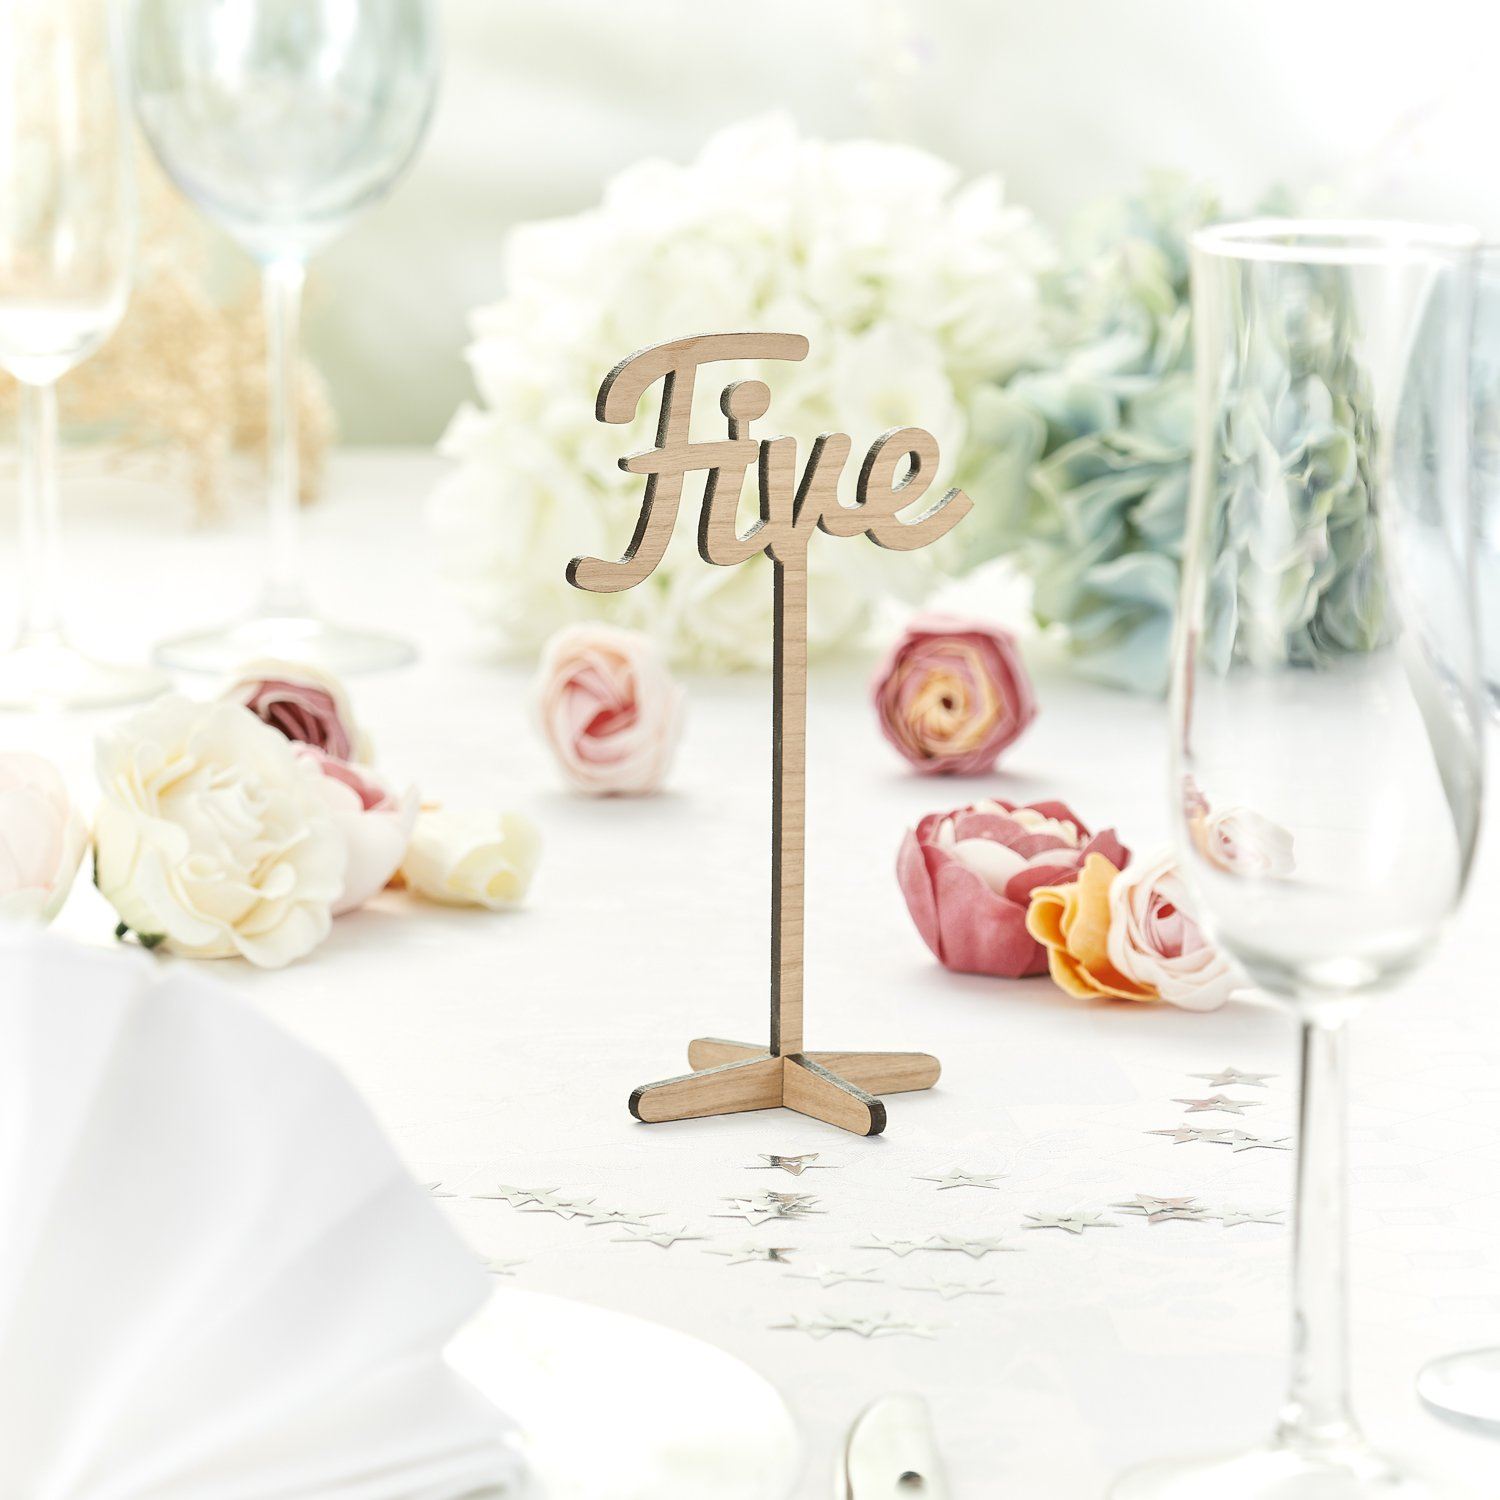 Table Numbers And Names - Rustic Wooden Wedding Table Numbers In Words